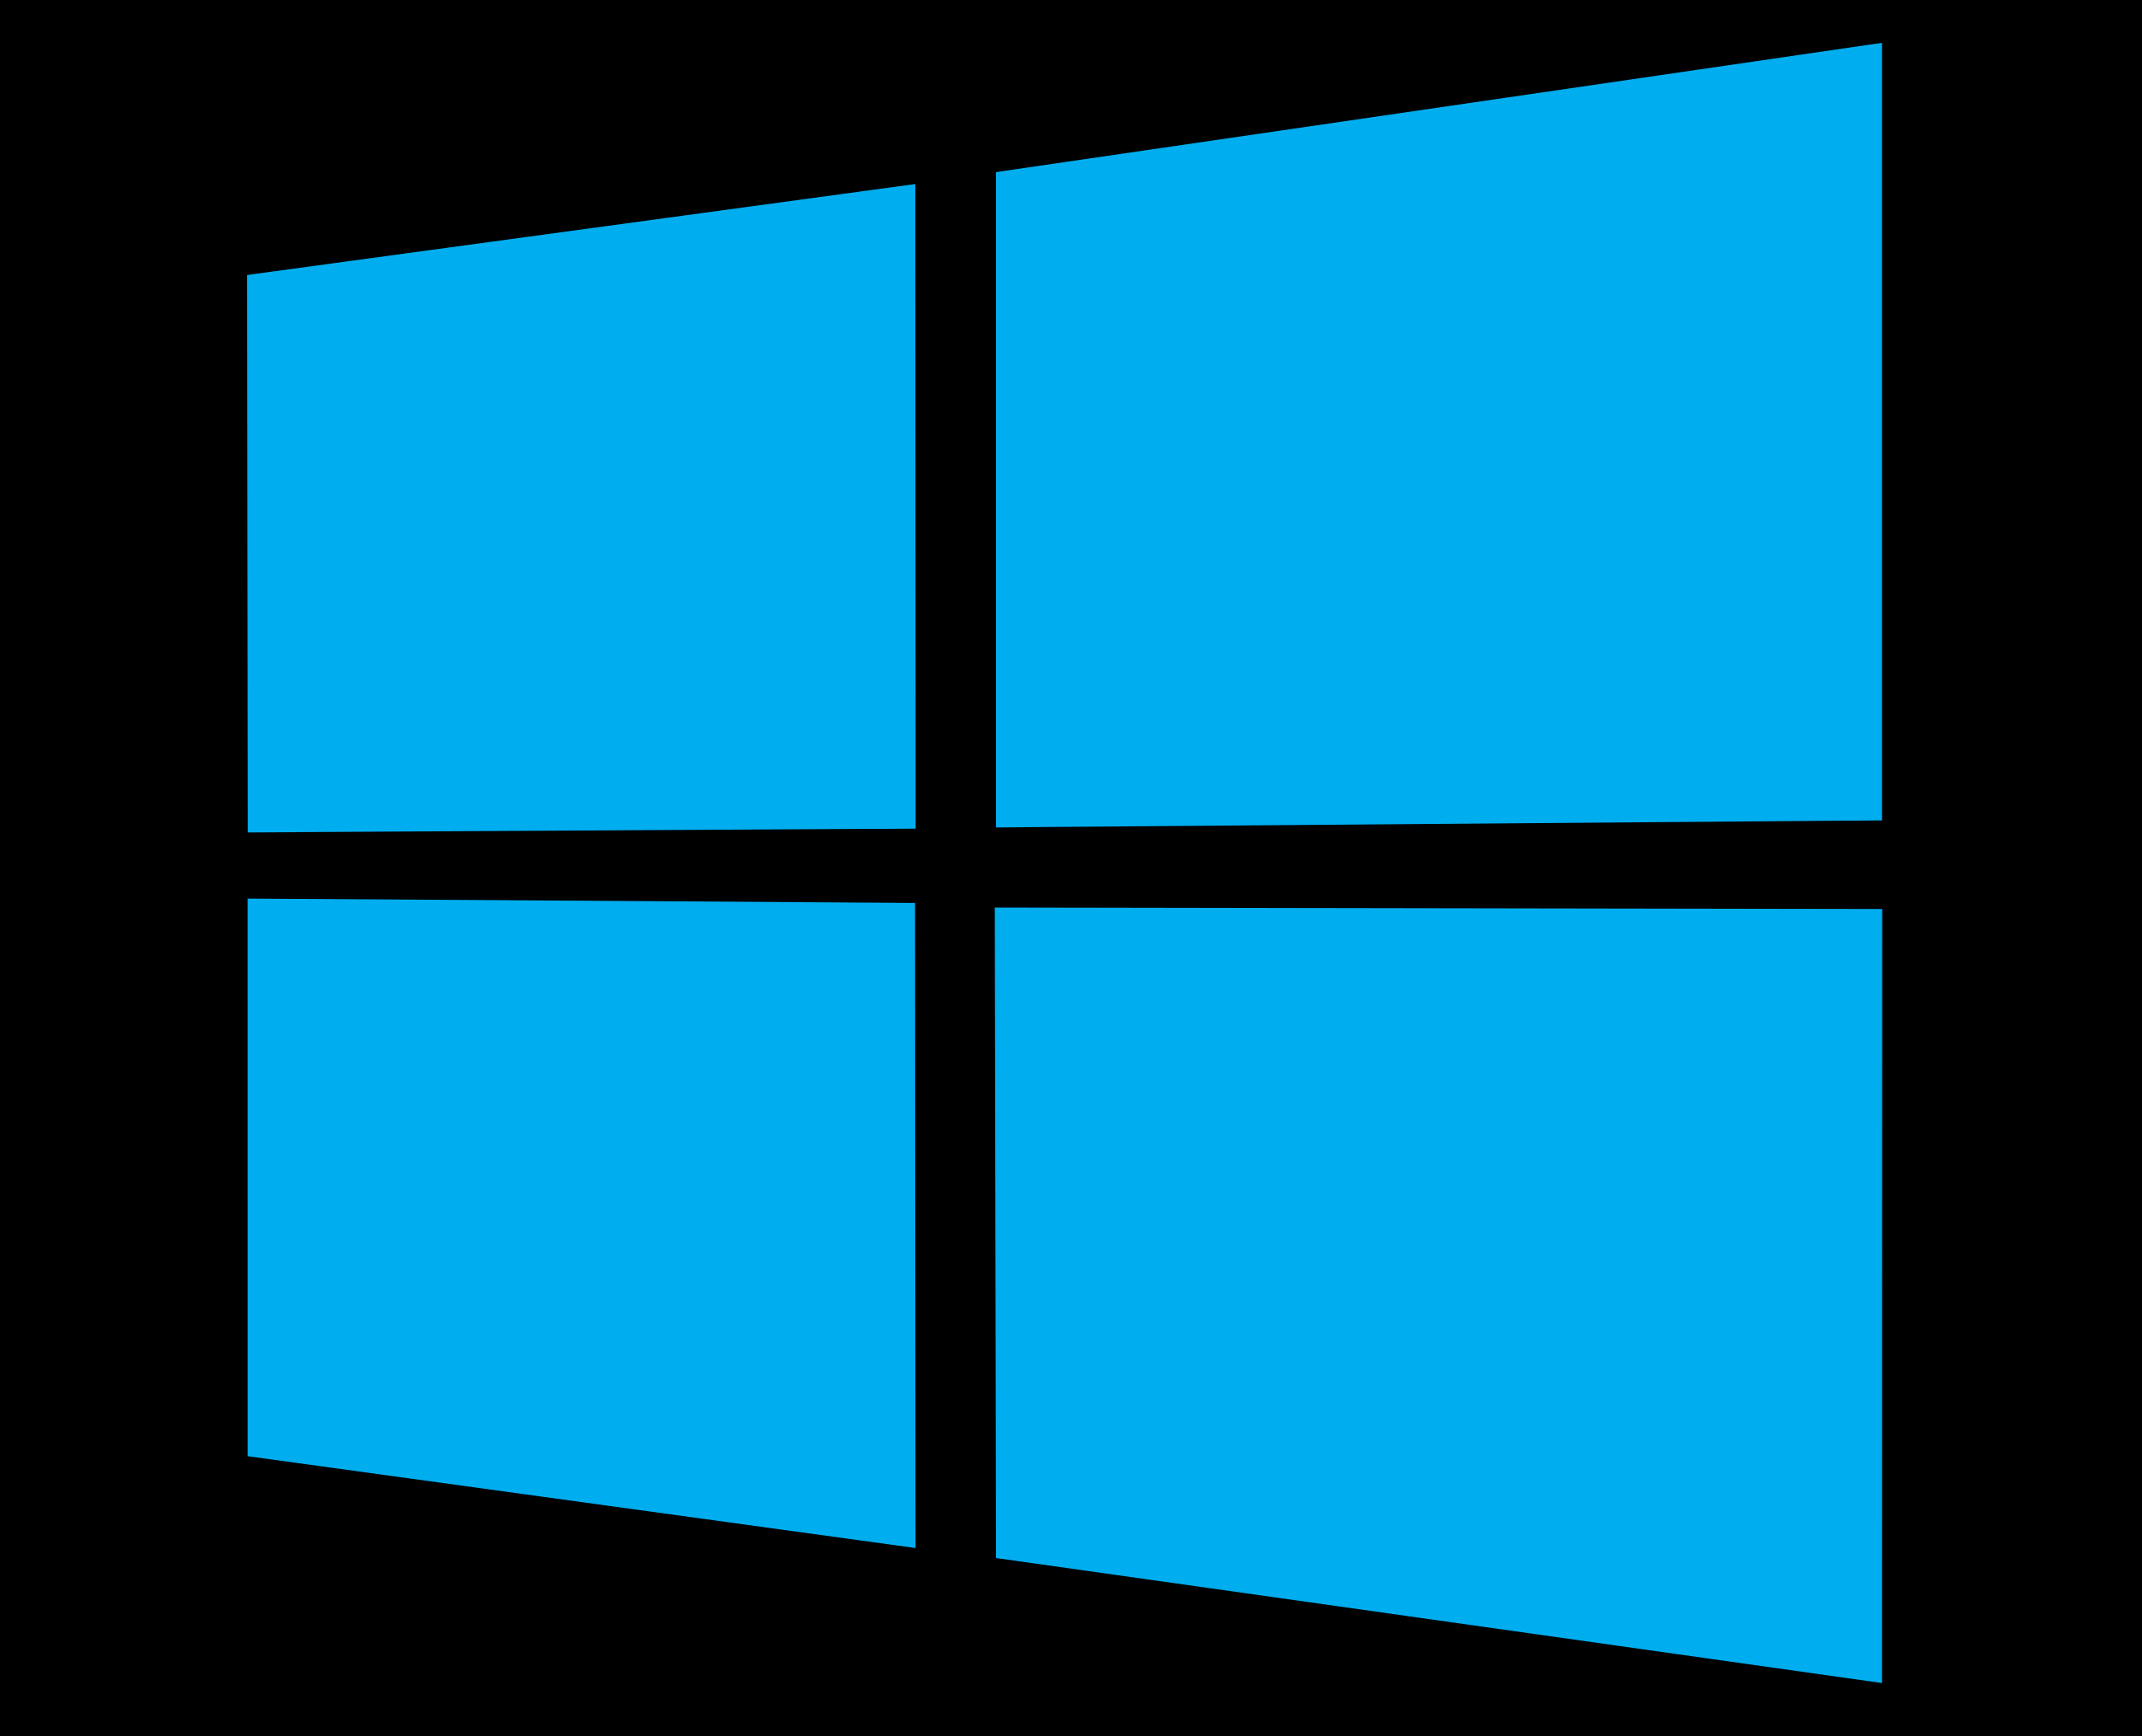 Windows 2001 Logo - Windows Logo, Windows Symbol, Meaning, History and Evolution